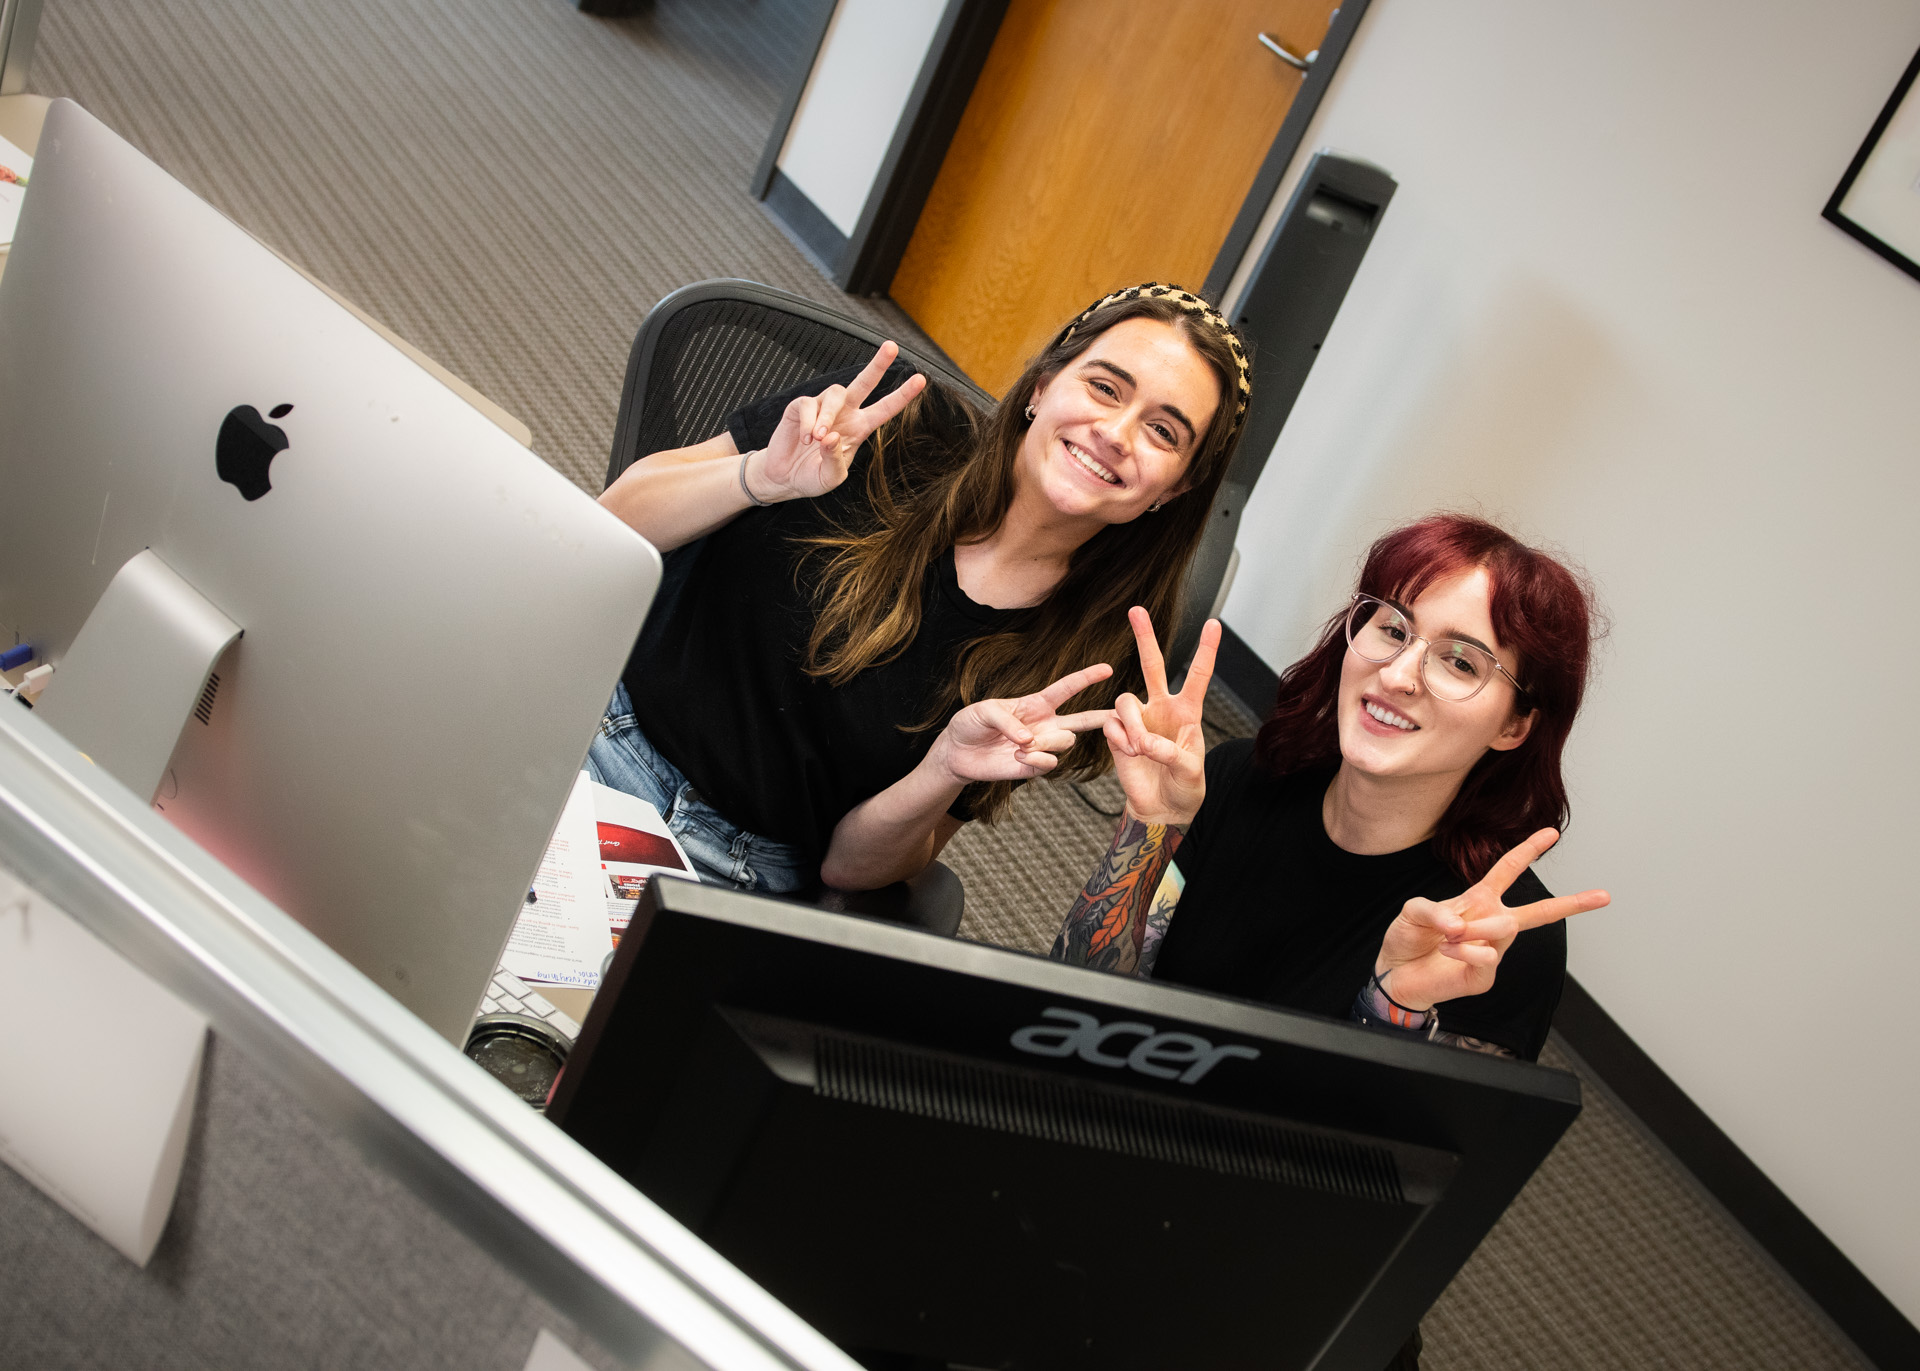 Two girls smiling in an office with peace signs